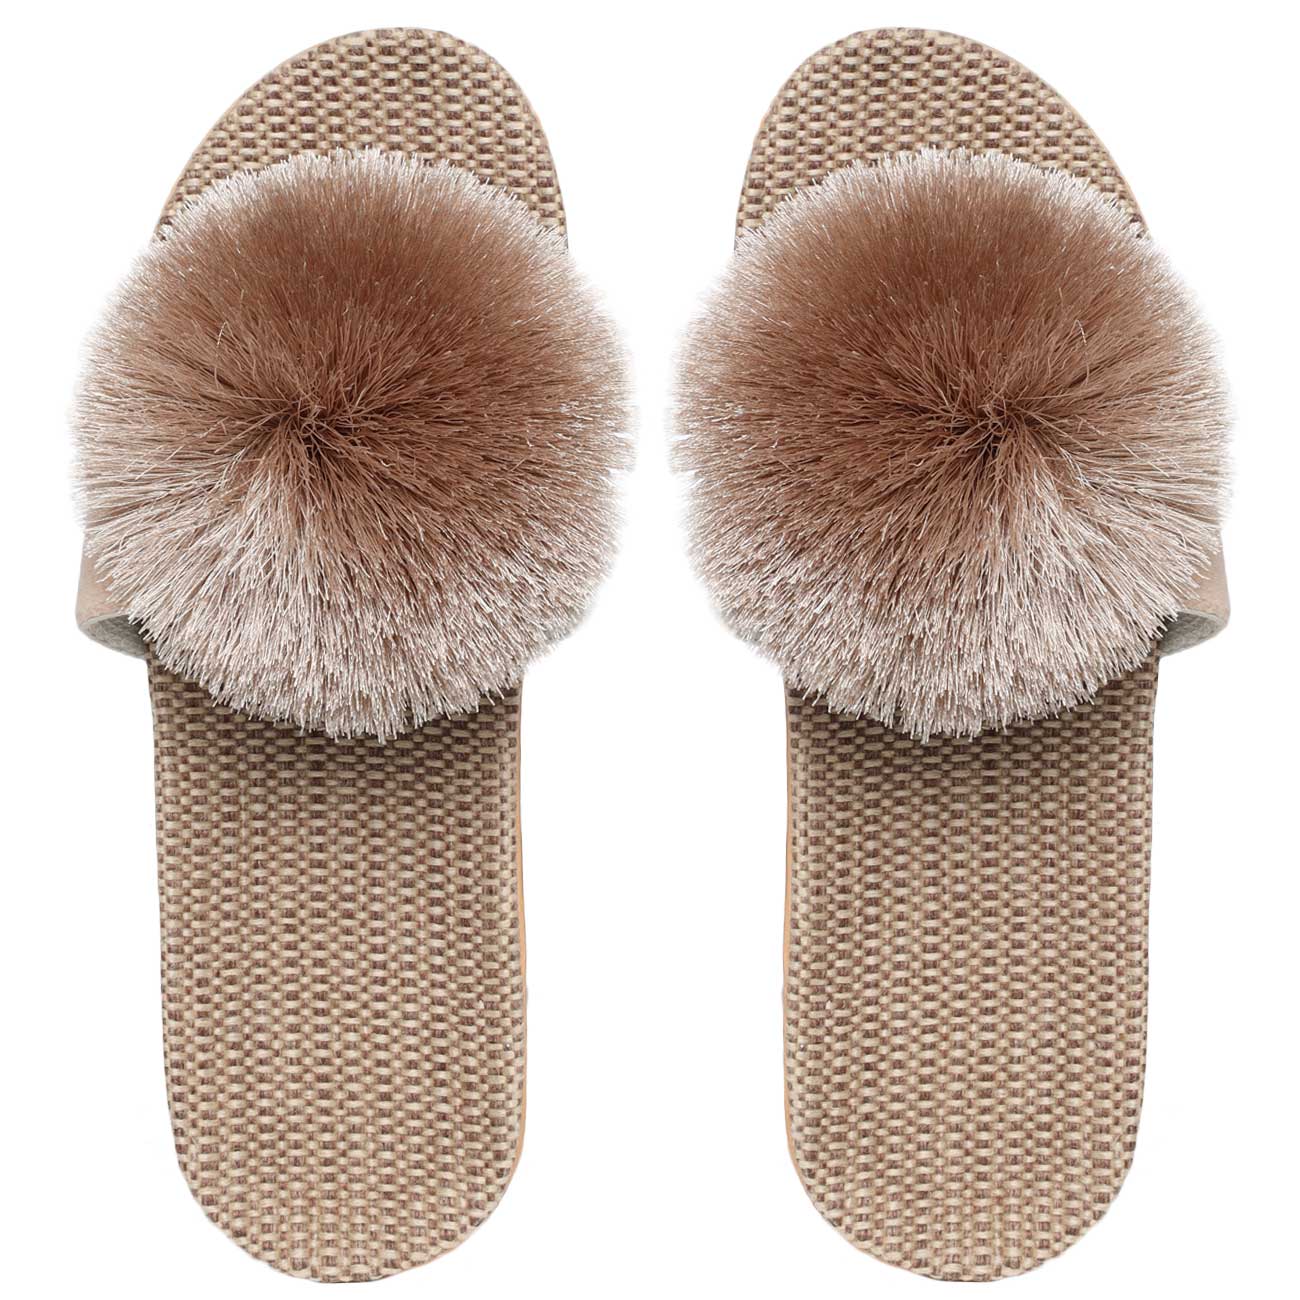 Slippers for women, home, p. 37-38, with pompom, polyester / linen, gray-brown, Pompon изображение № 2